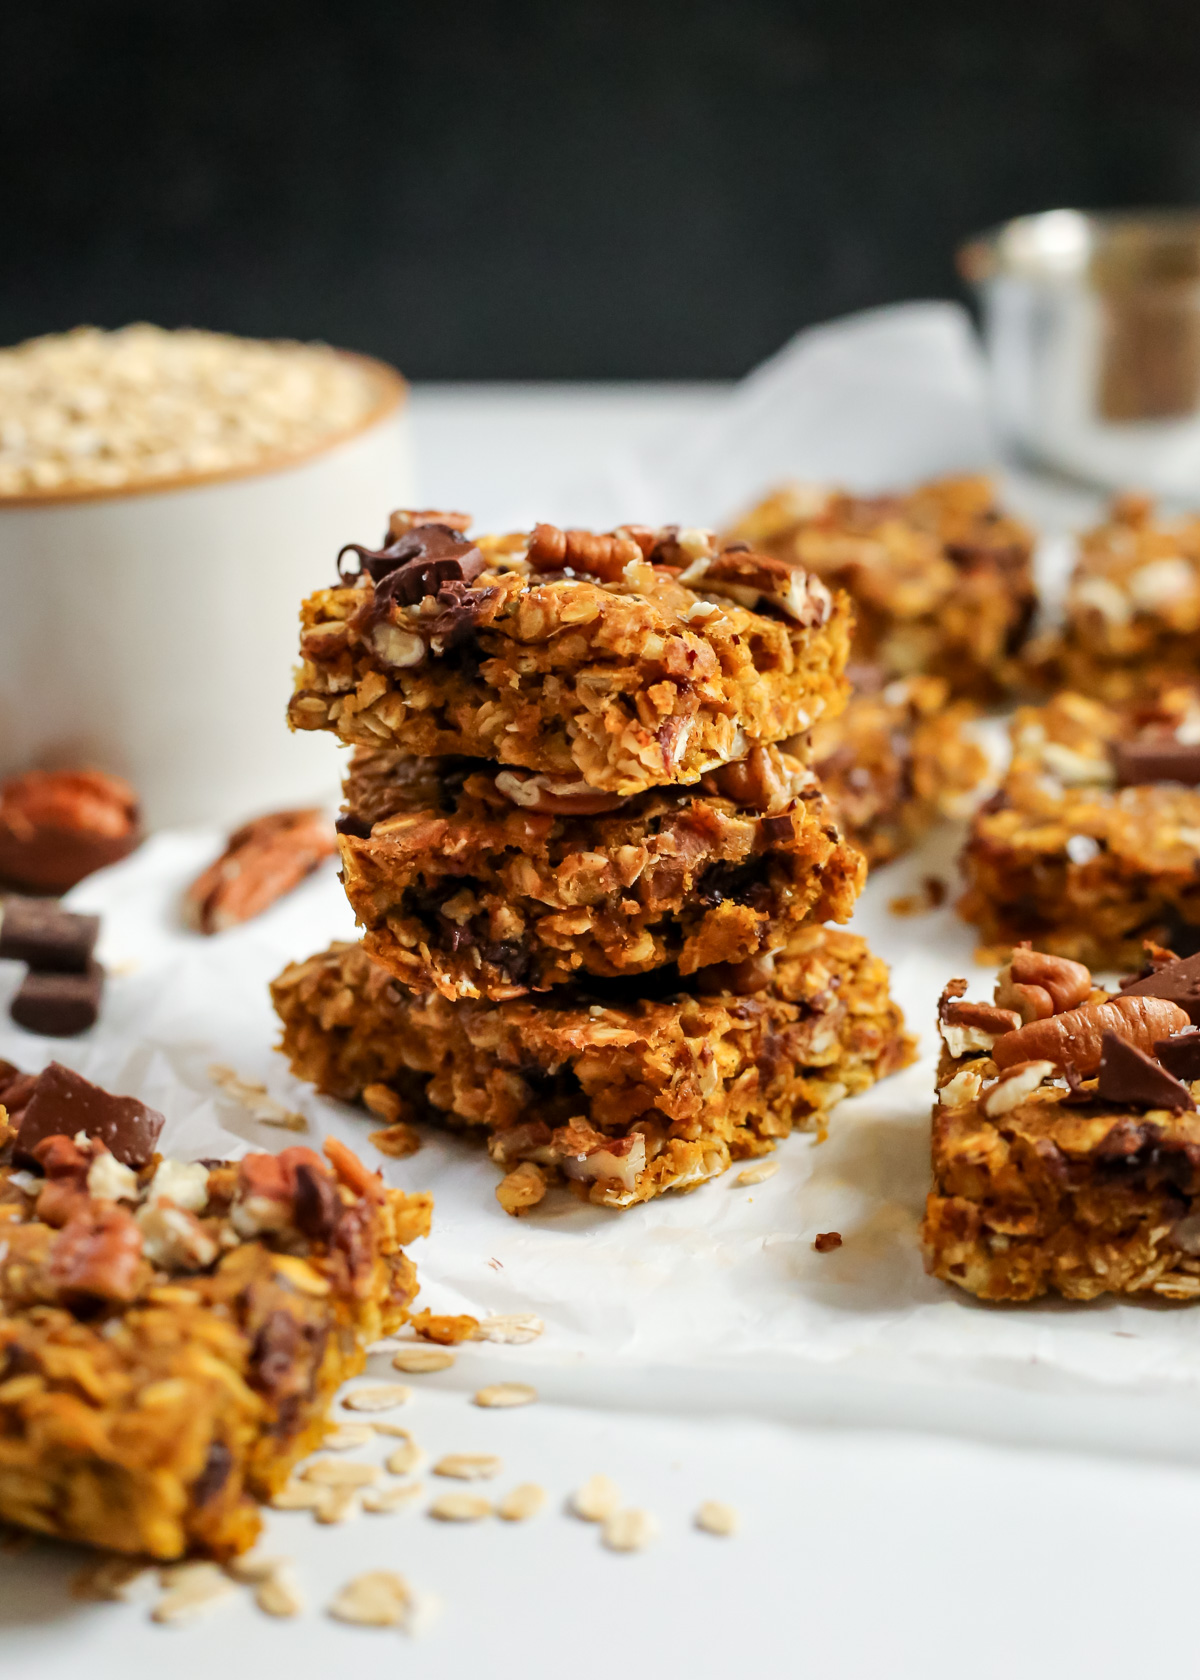 A stack of three pumpkin oat bars is stacked in front of a dark black background and displayed among other bars as if they were just sliced. The texture is dense and crumbly with visible chunks of chocolate and pecans mixed throughout